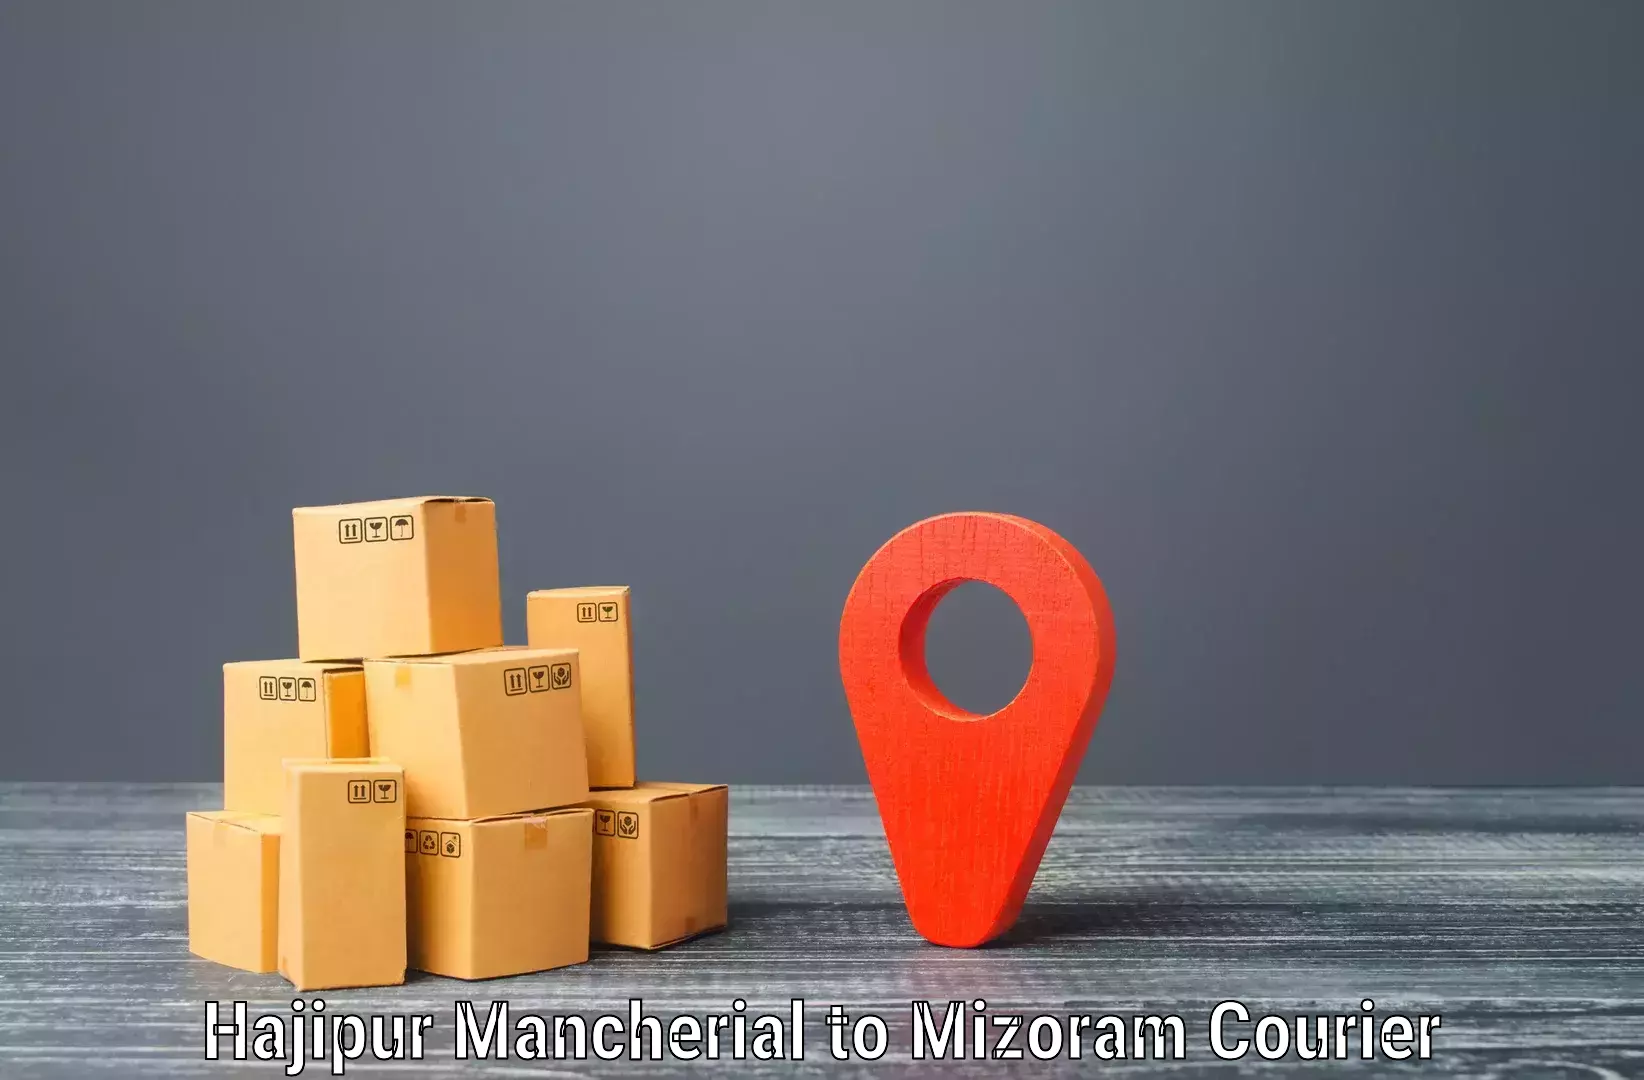 Round-the-clock parcel delivery in Hajipur Mancherial to Aizawl